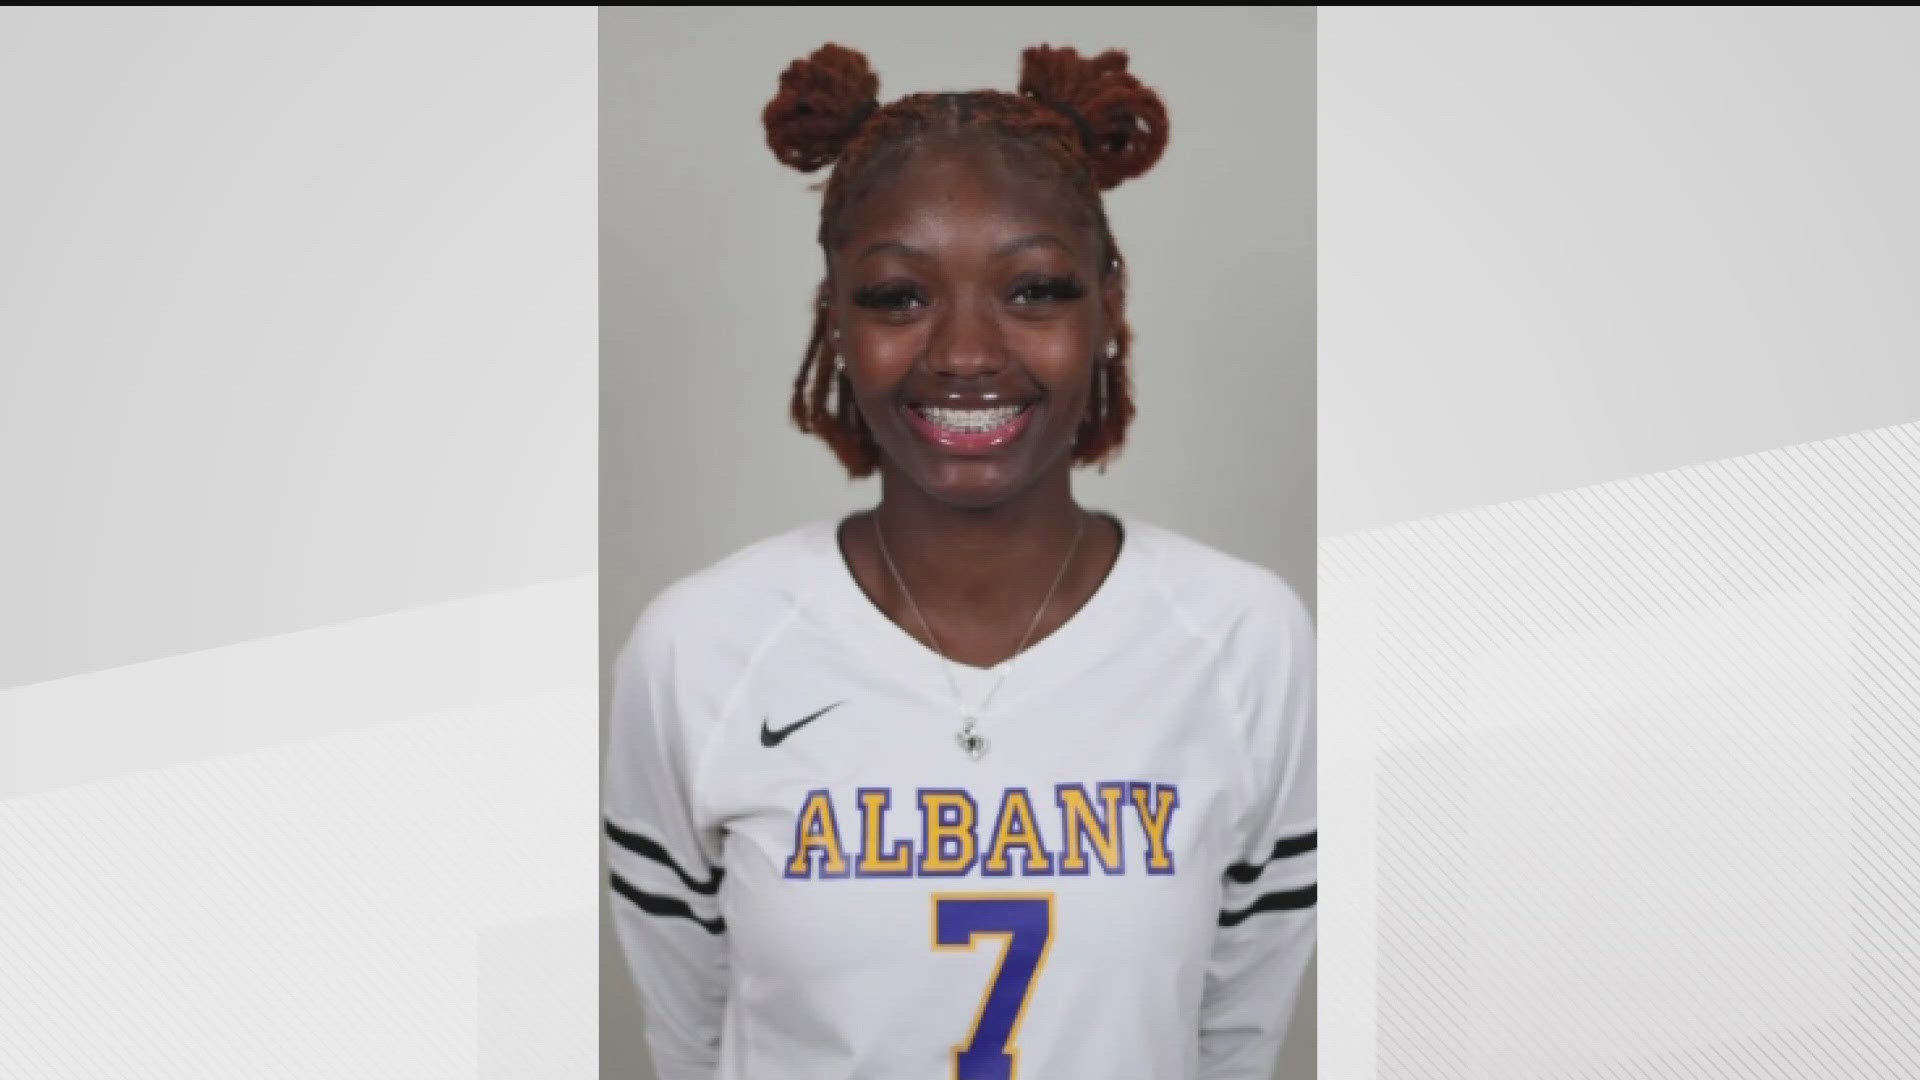 Mari Creighton, a rising senior and volleyball player at Albany State University, was one of two people killed after shots rang out at Elleven45 Lounge on May 12.